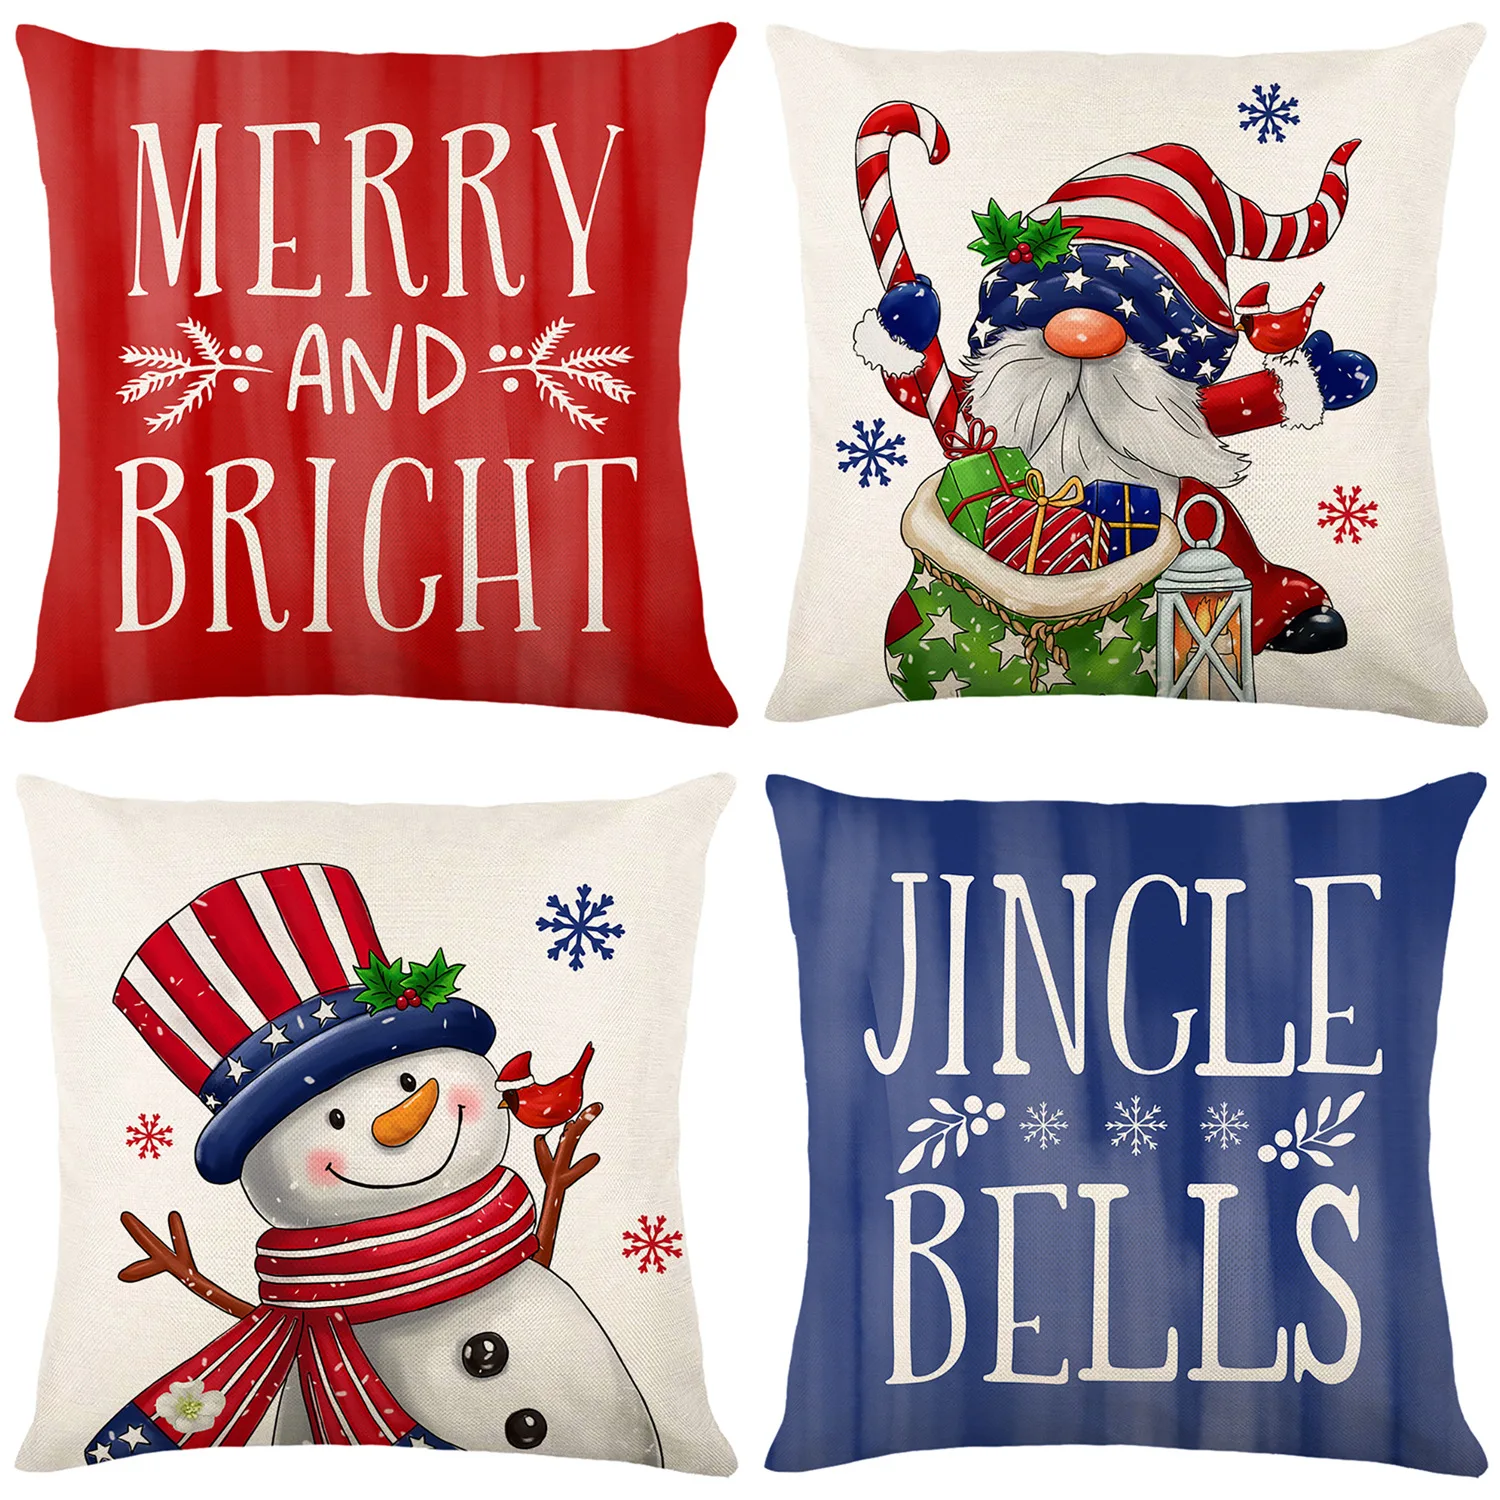 

Merry Christmas Decorative Pillow Cover, Linen Throw Pillowcase, Snowman Decorations, Cushion Cover for Bed Room, 18x18 in